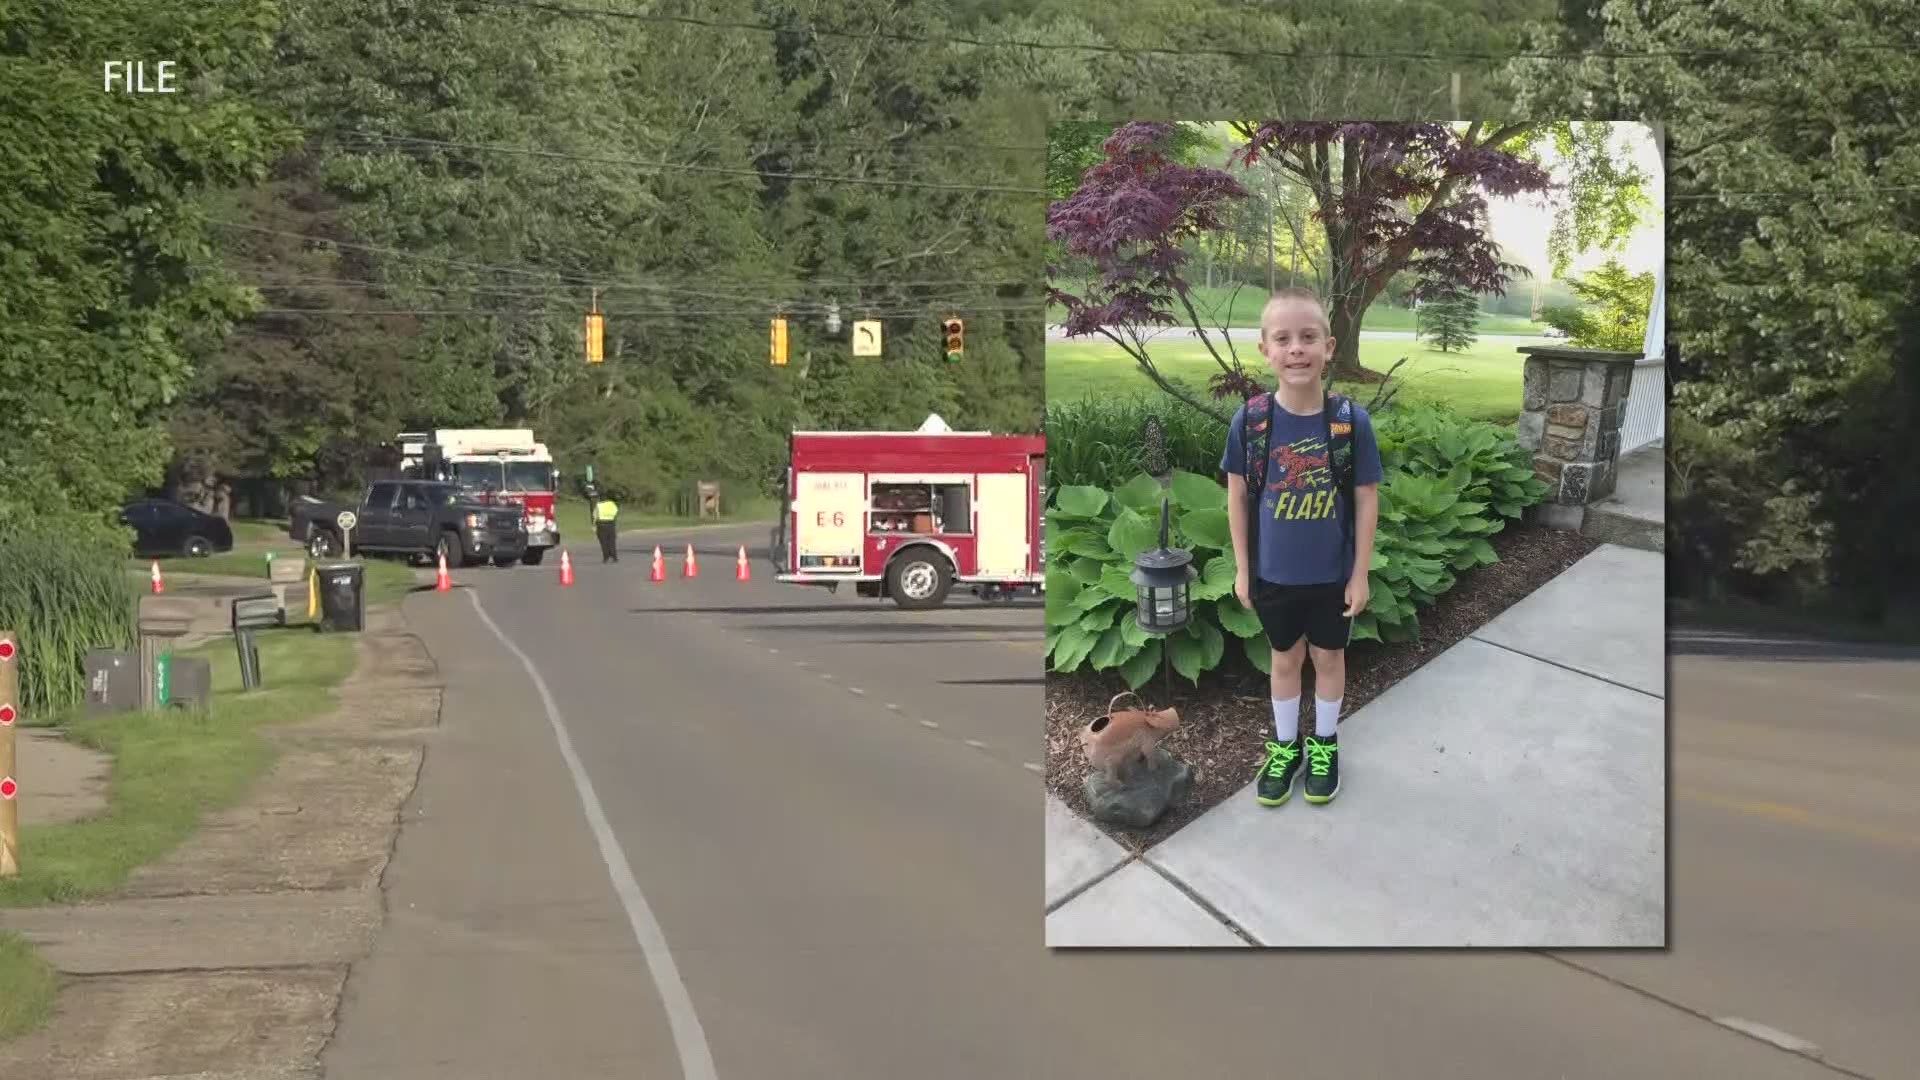 After losing their son, one couple is continuing to educate the community about bicycle safety.